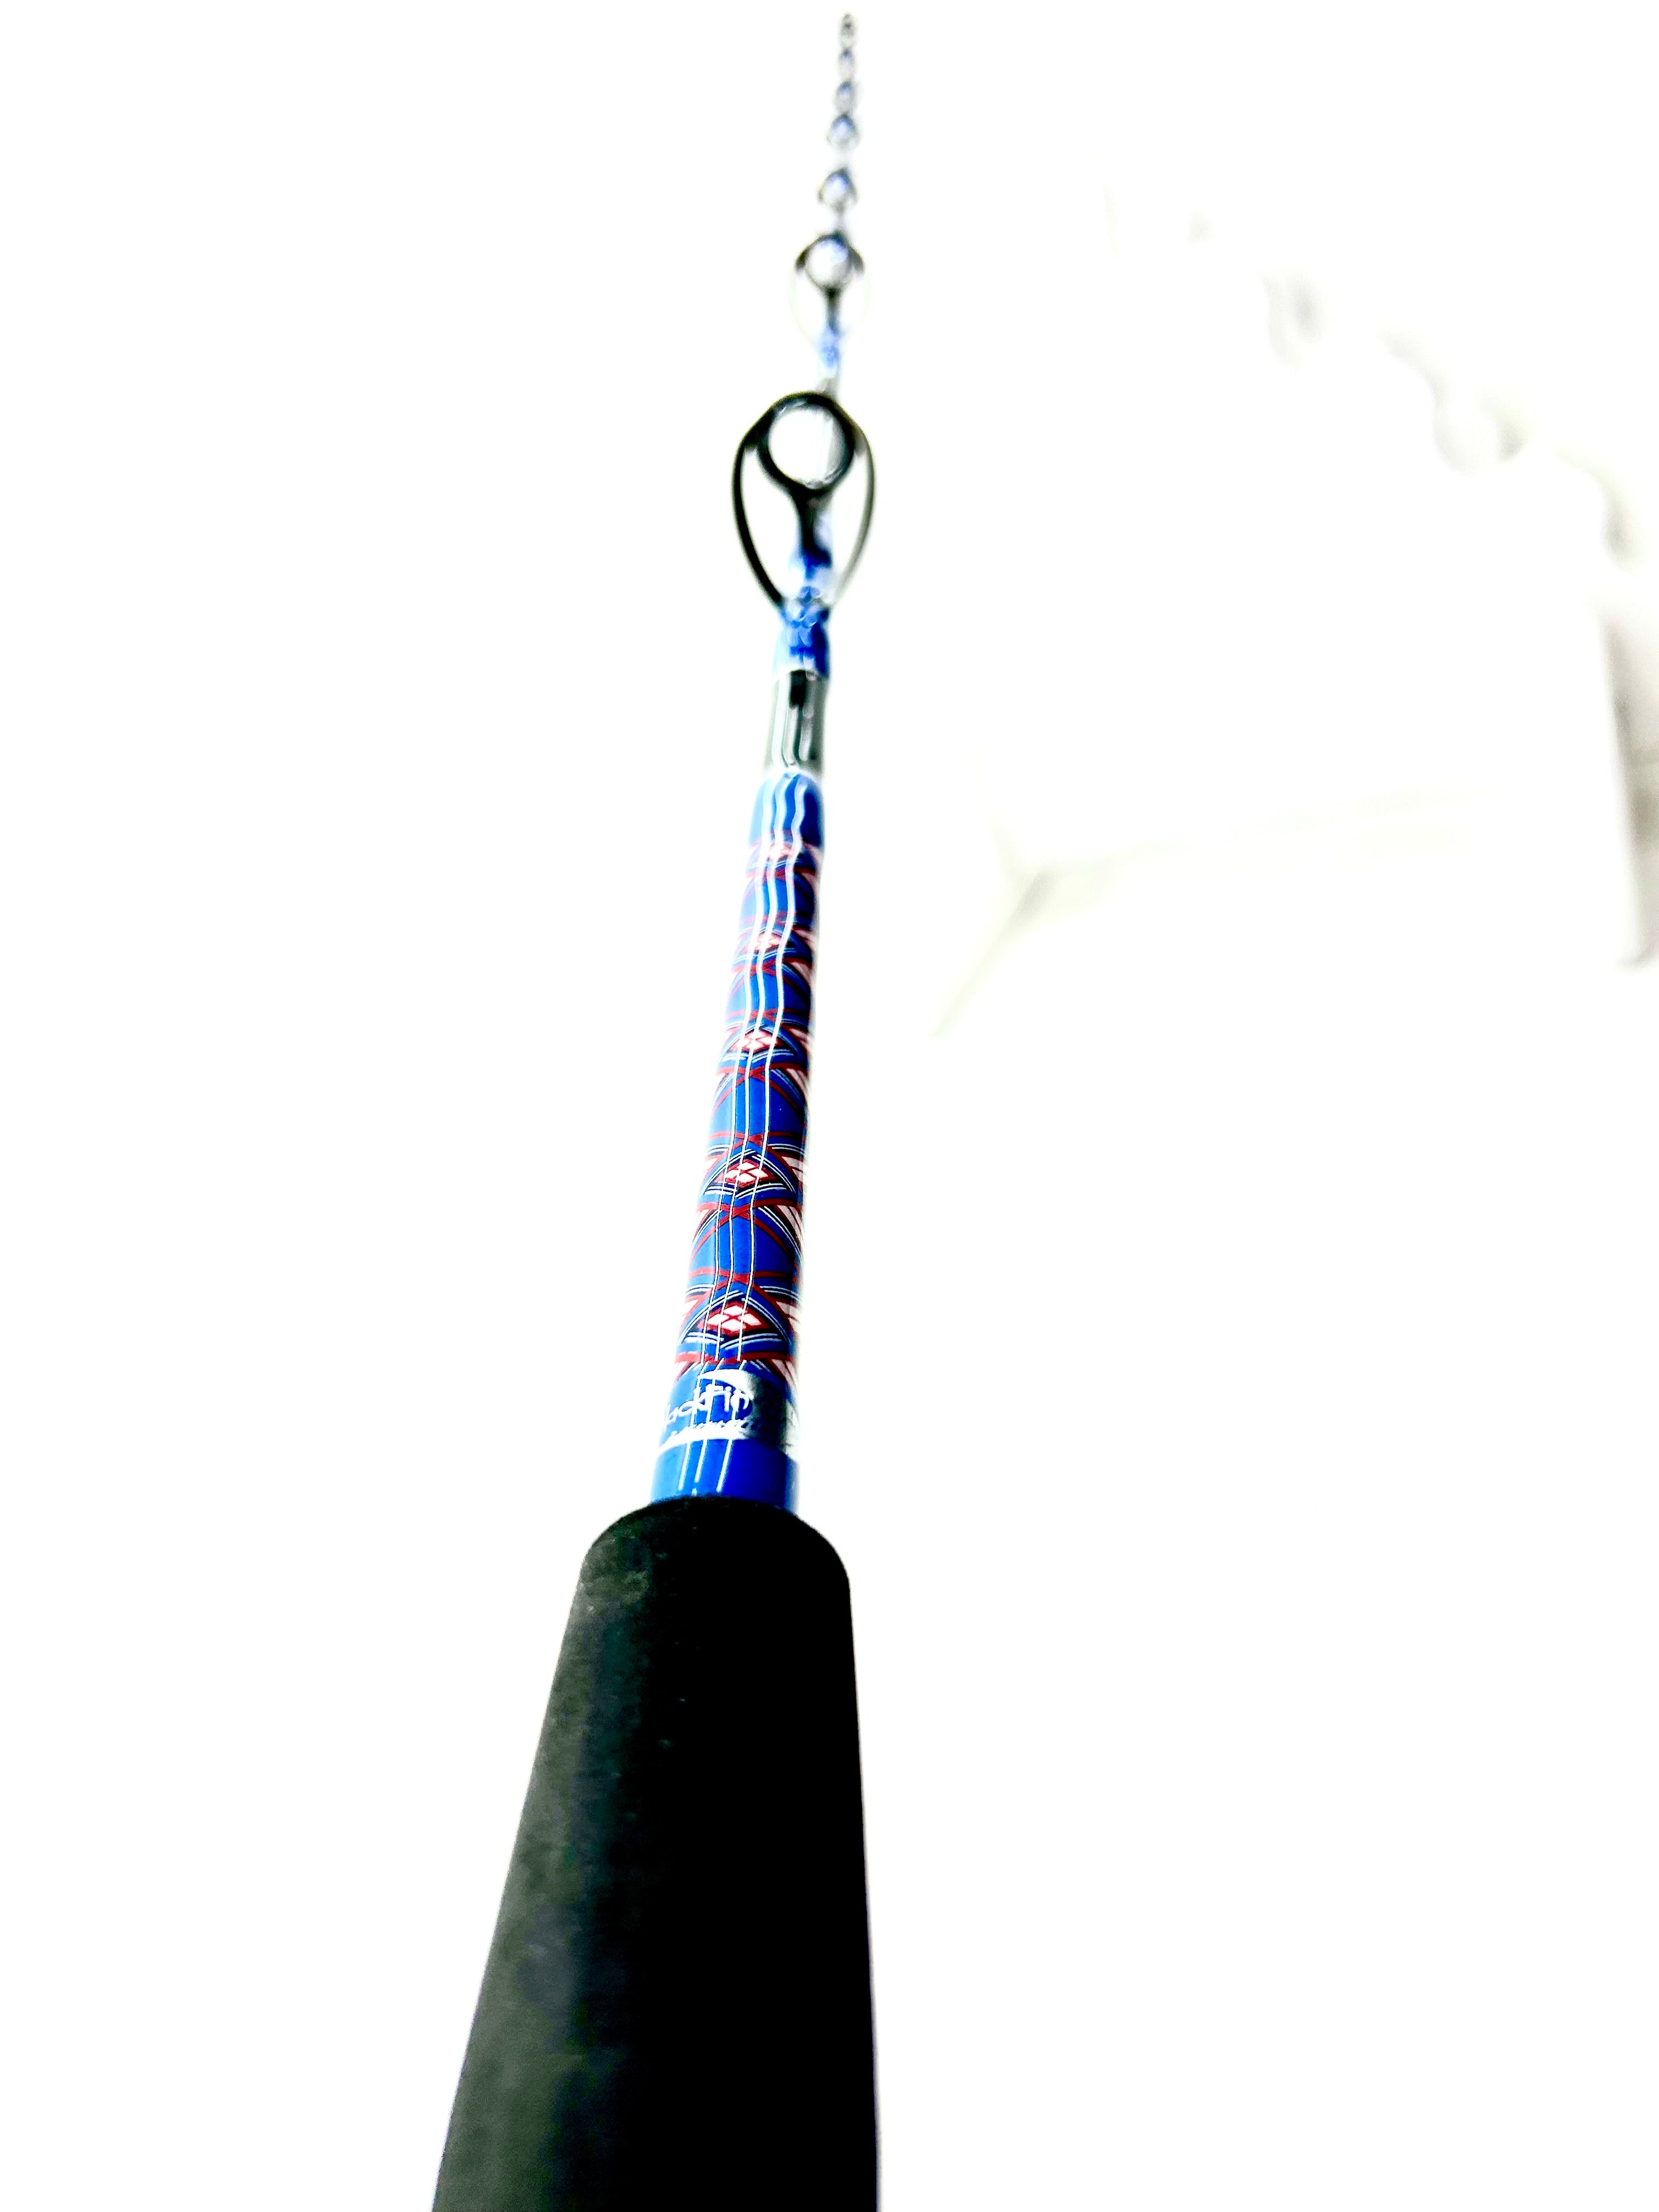 01 Limited Edition 4th of July 6ft bait caster rod – Blackfin Rods